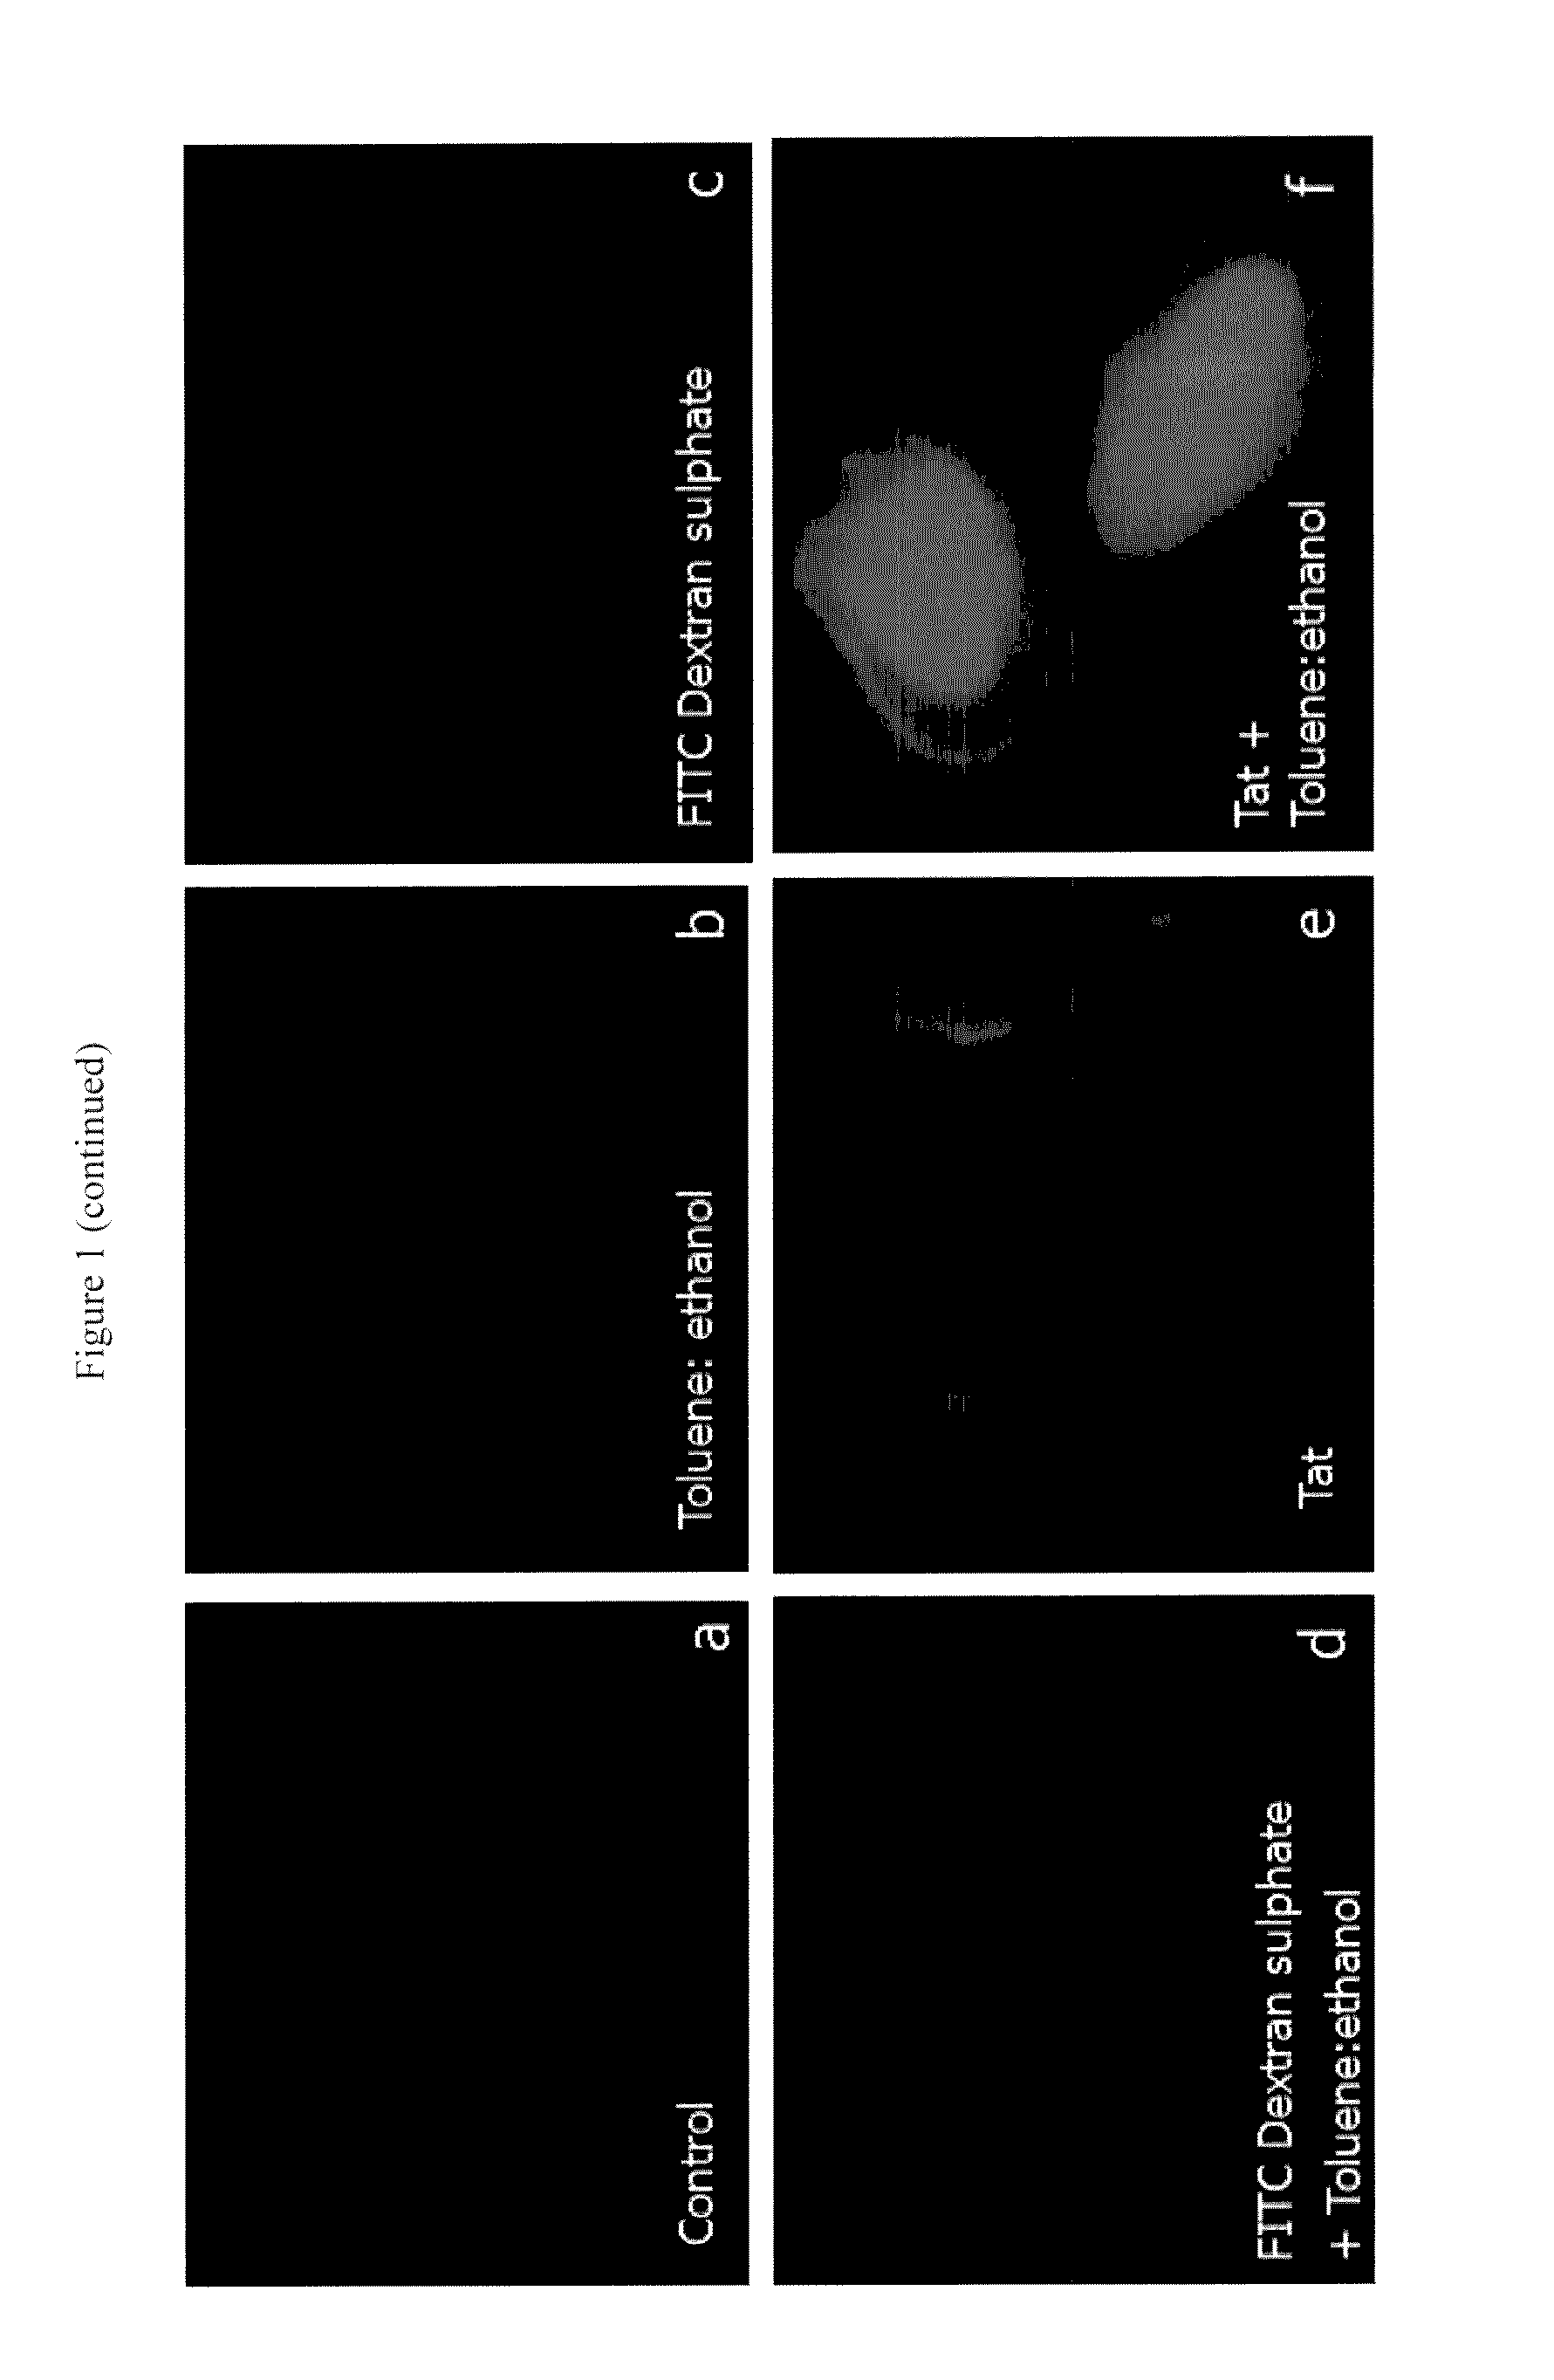 Nanocarrier based plant transfection and transduction